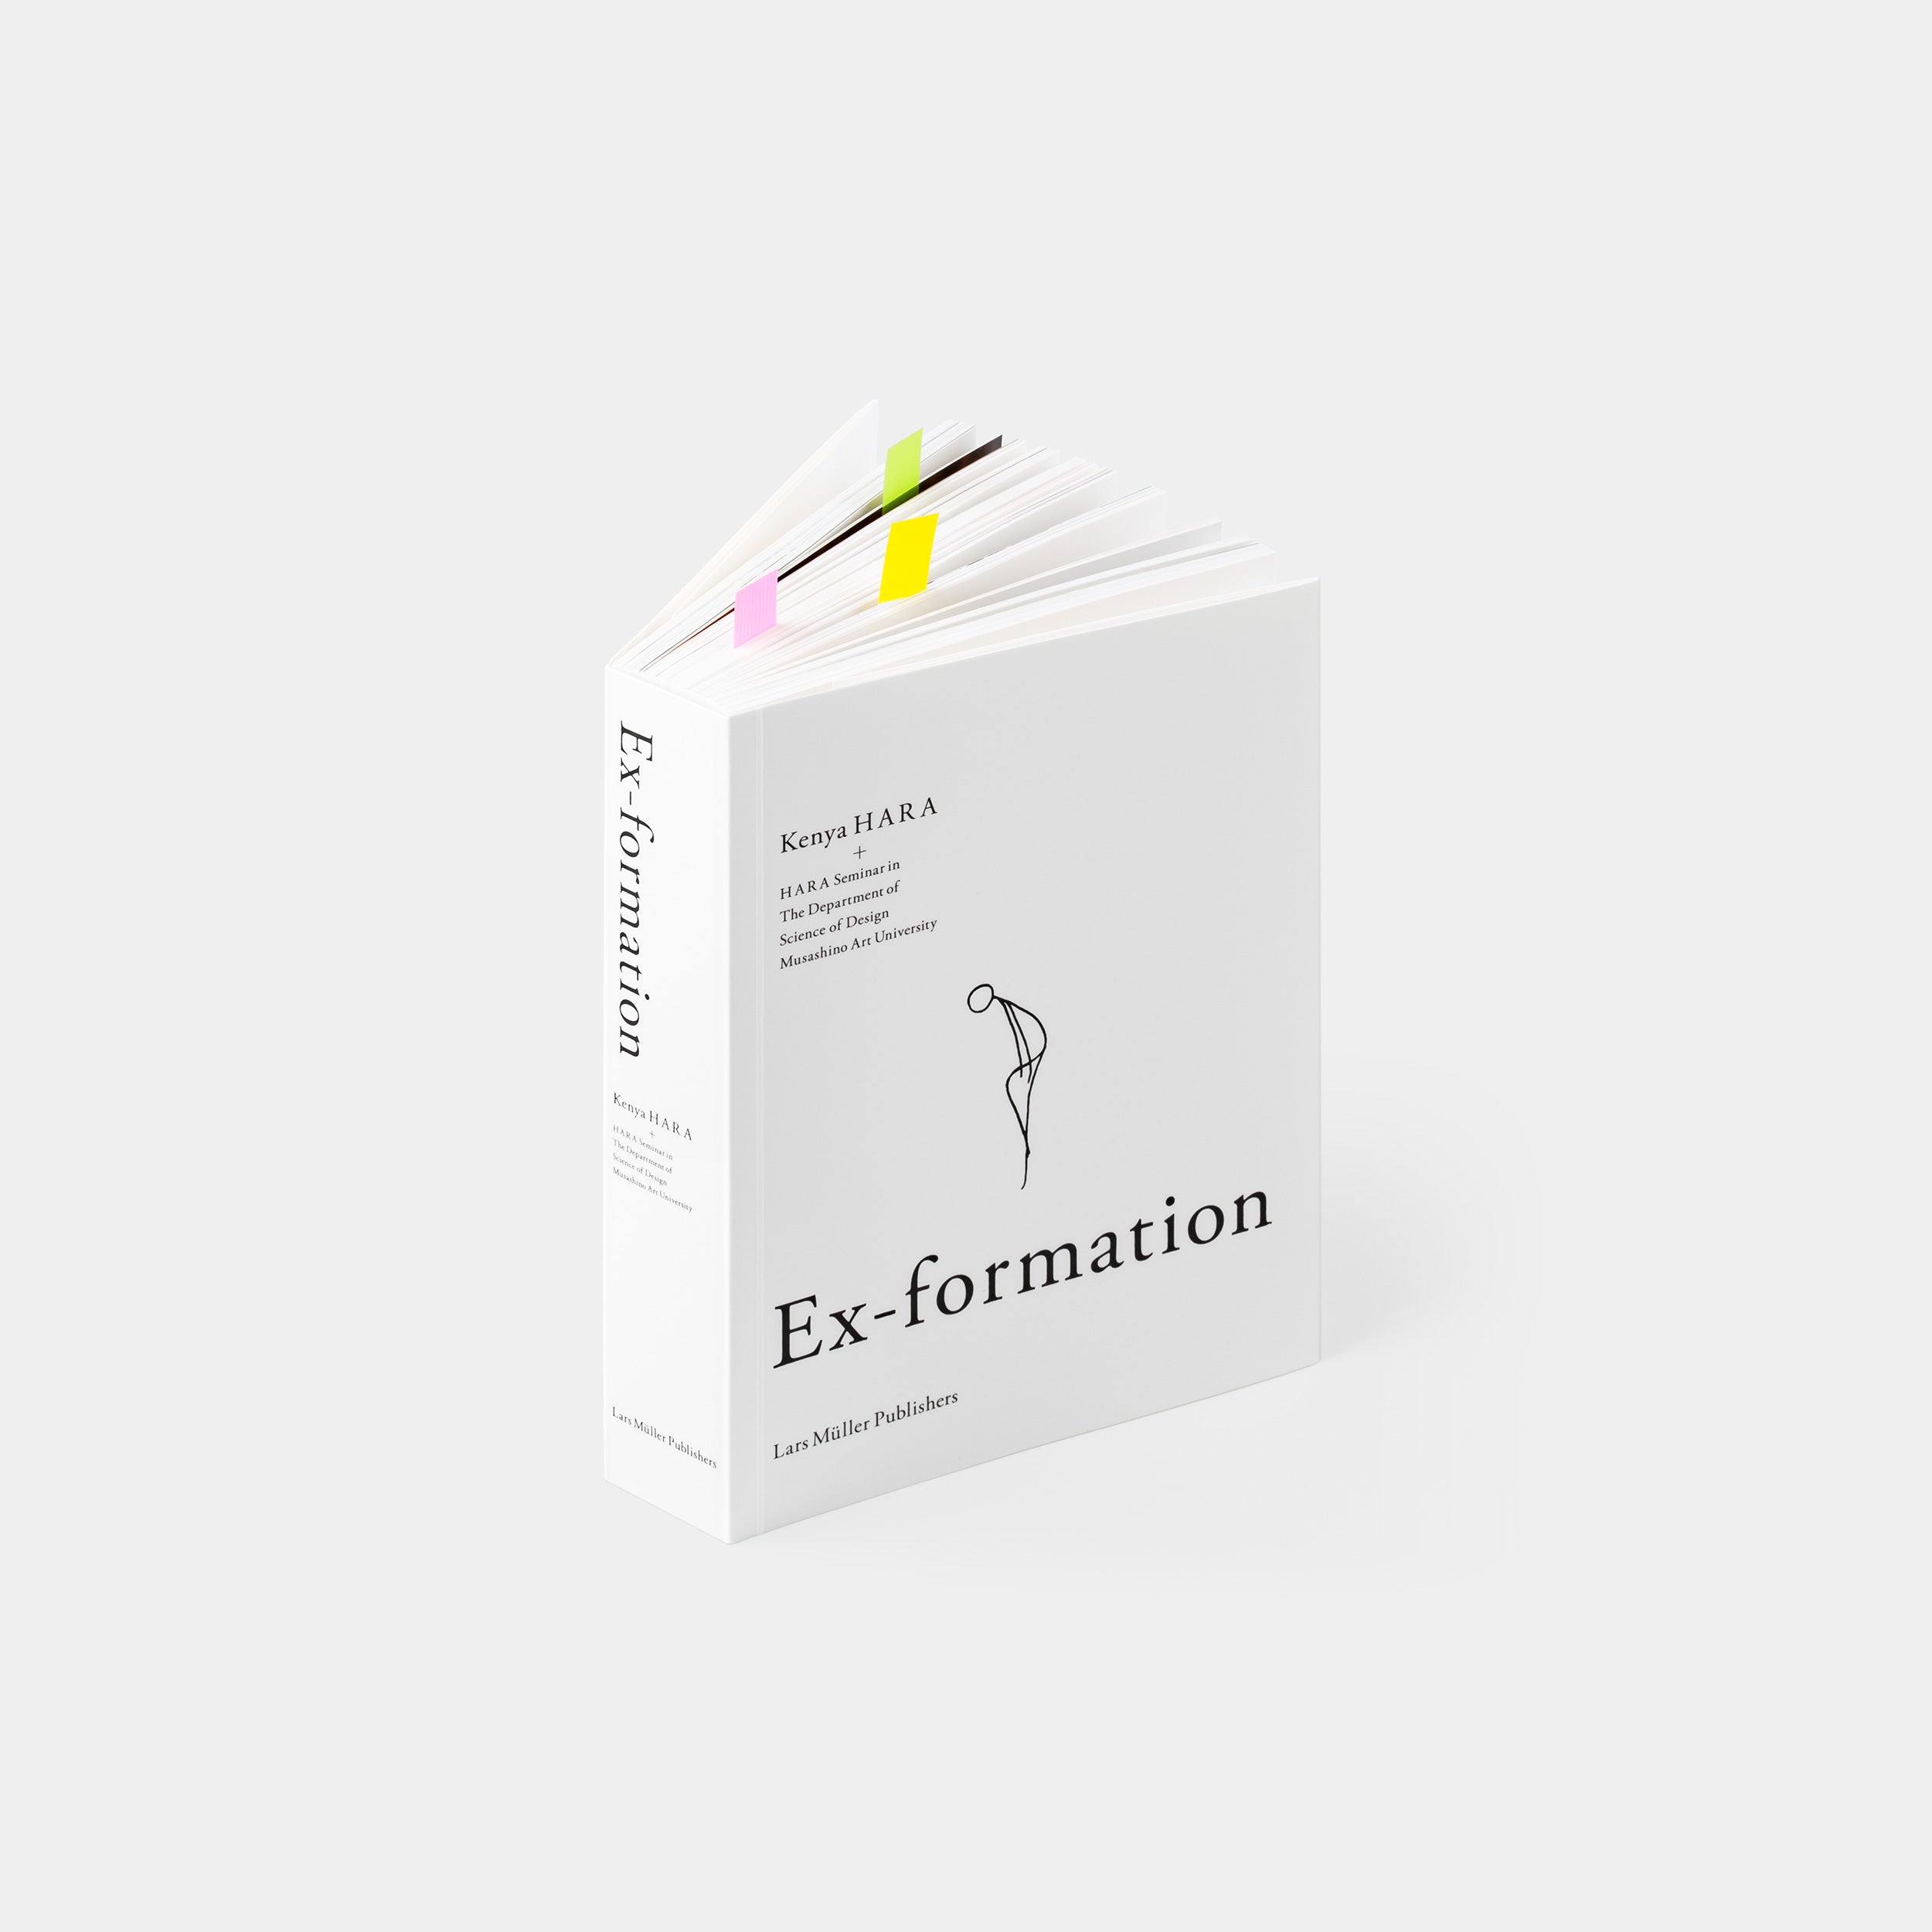 Ex-formation by Kenya Hara standing